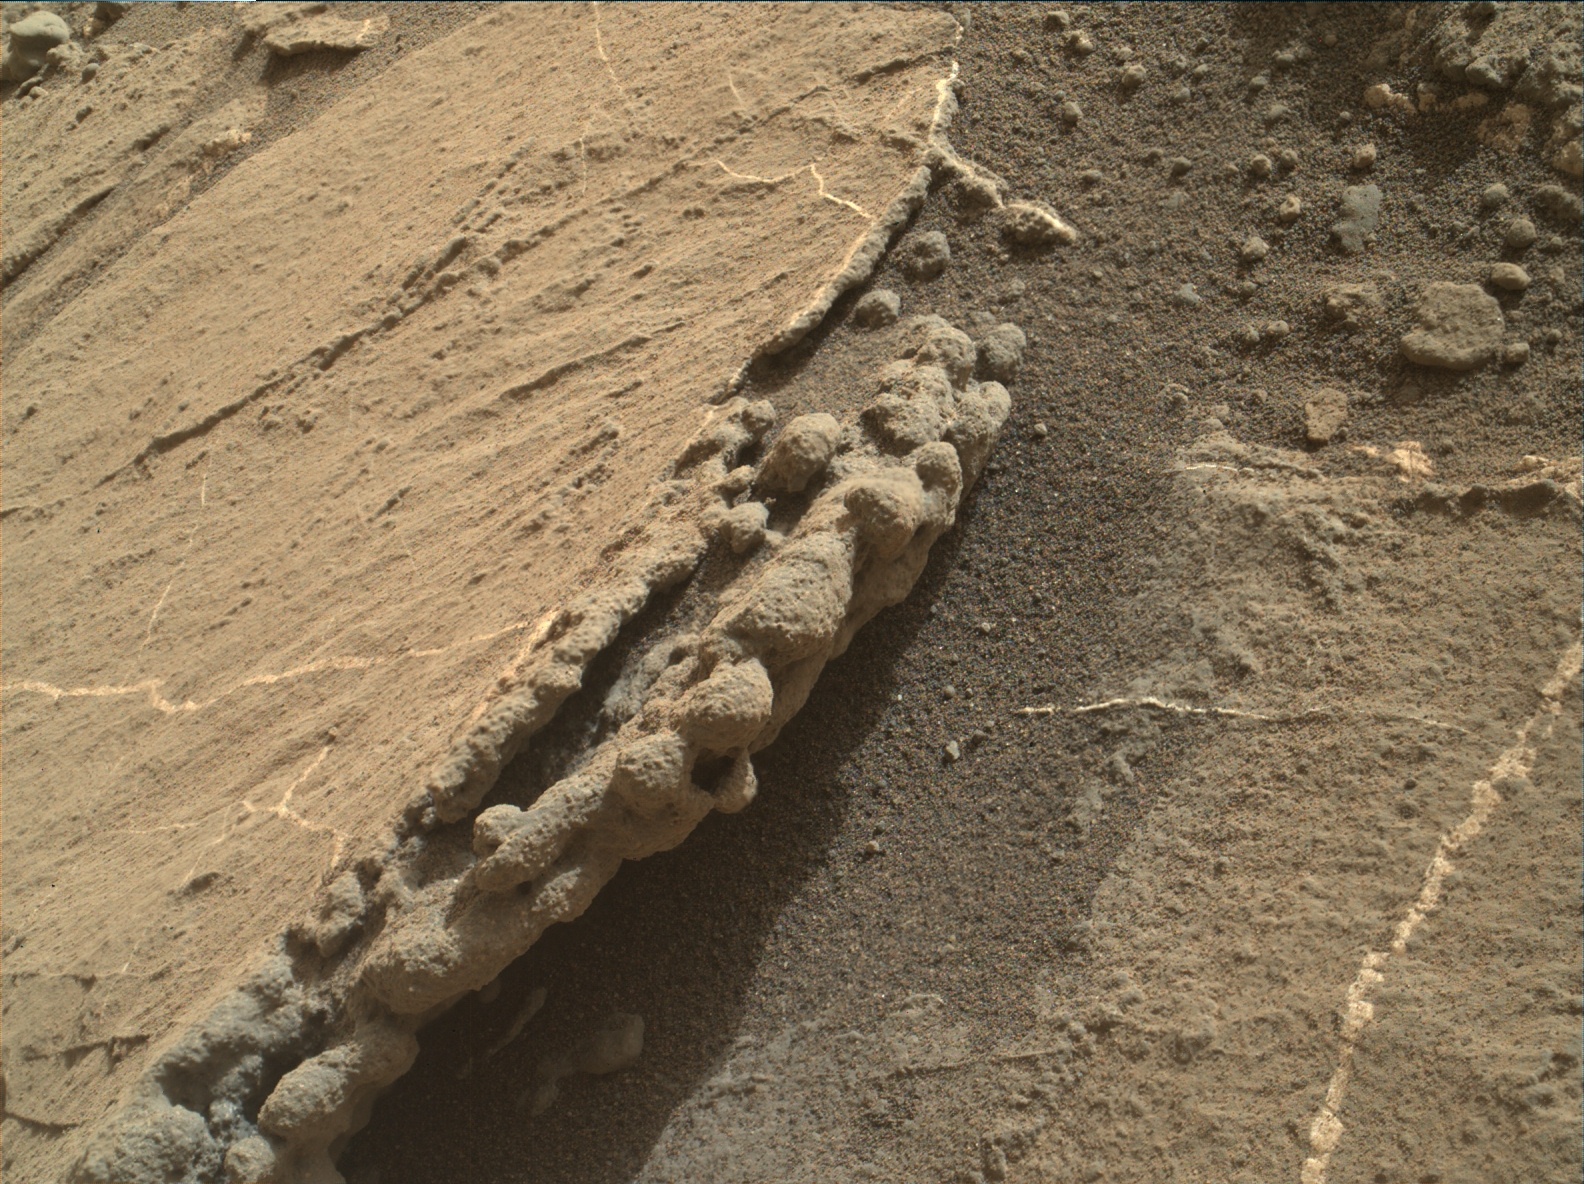 Nasa's Mars rover Curiosity acquired this image using its Mars Hand Lens Imager (MAHLI) on Sol 1106